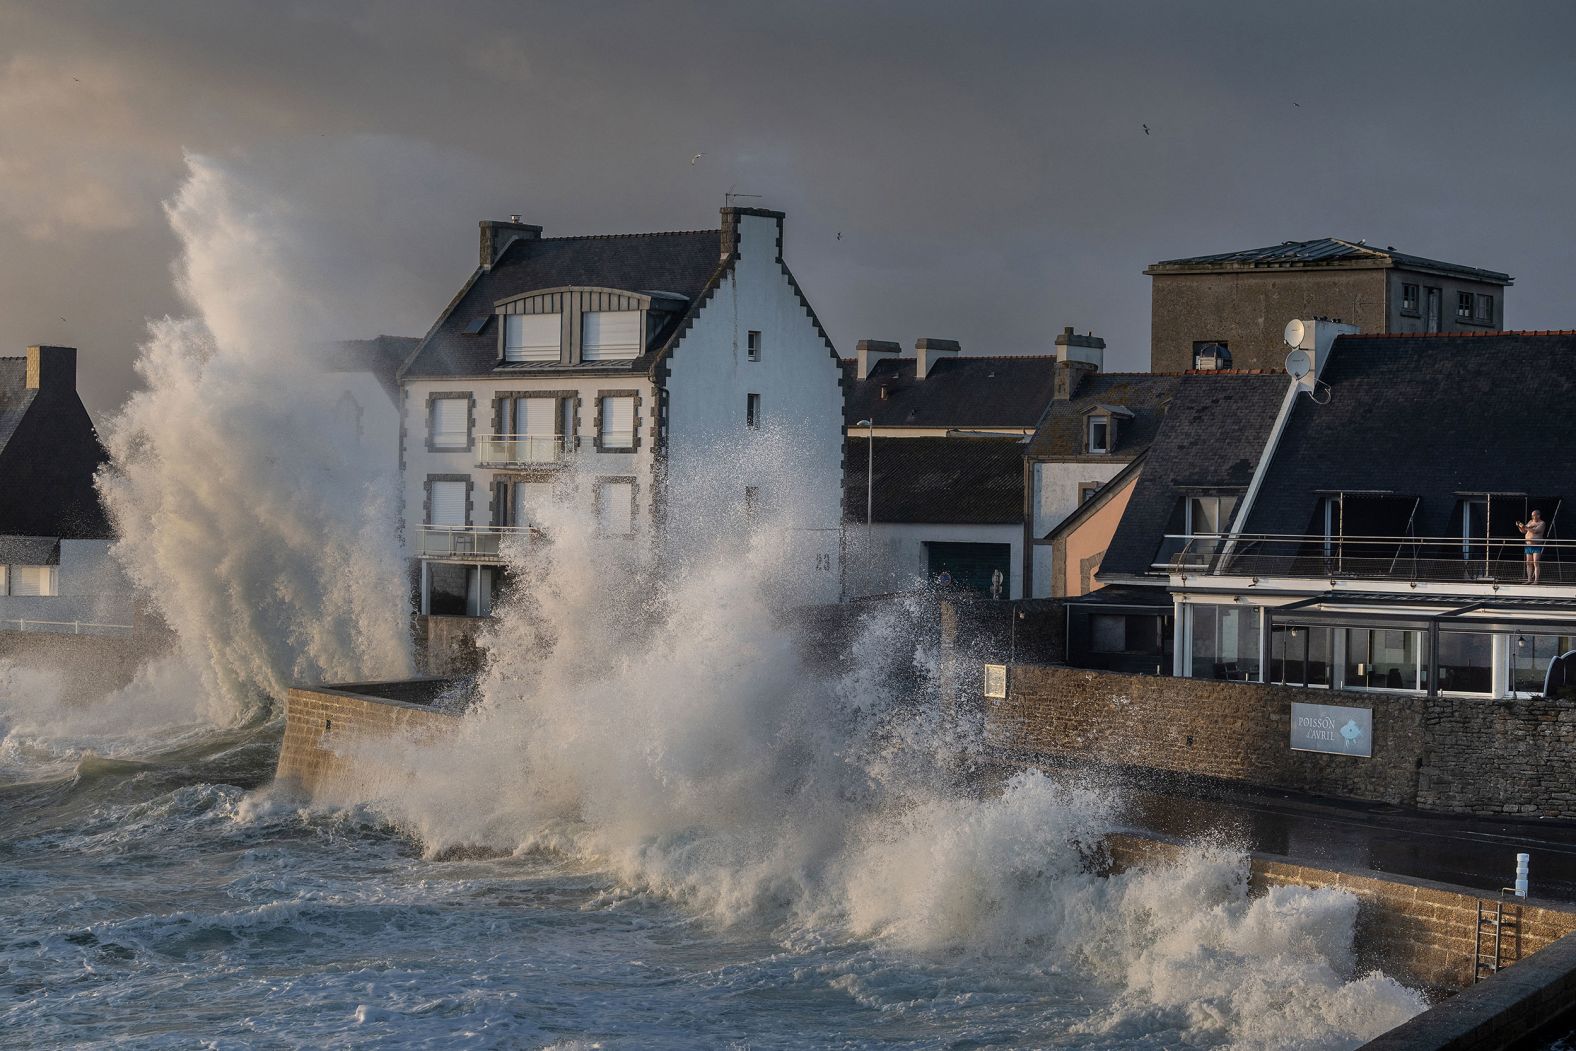 Waves hit the shore in the port of Le Guilvinec, France, on Saturday, February 10. A powerful storm was set to hit the area.